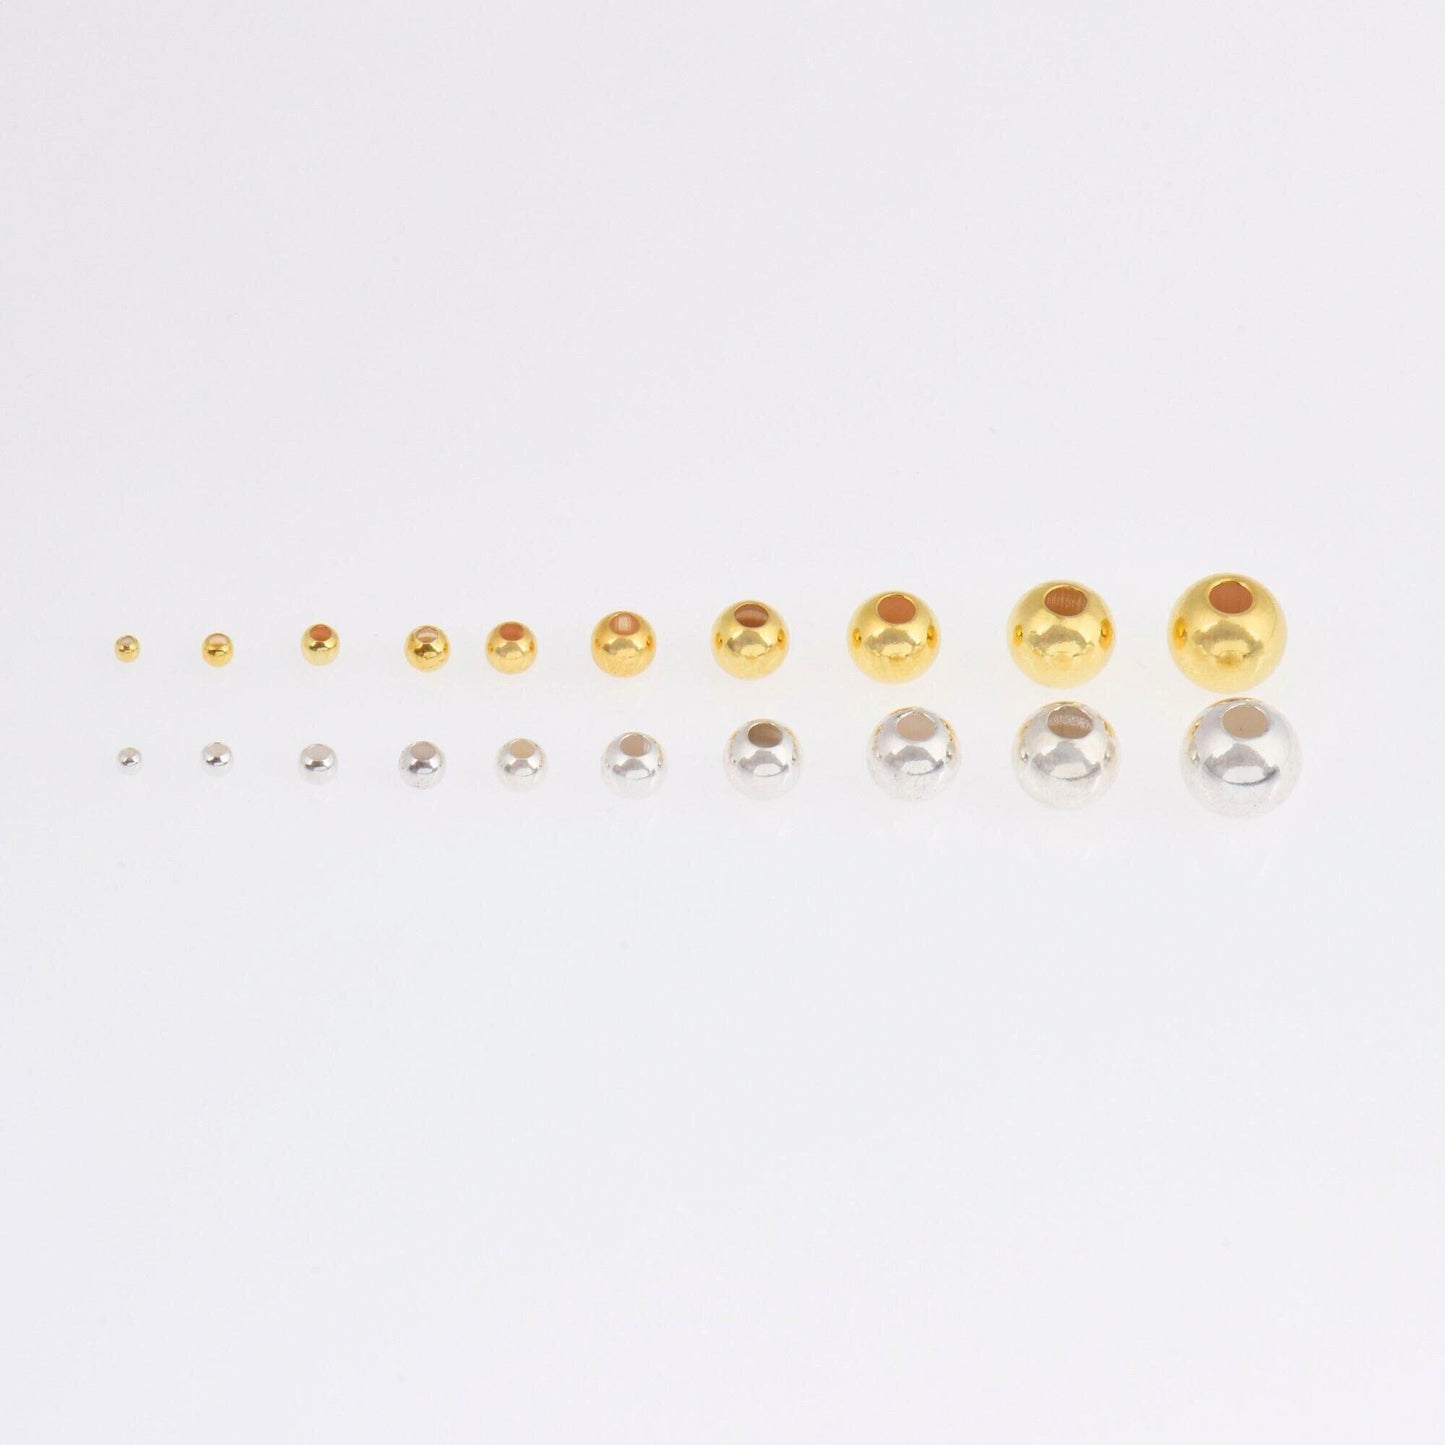 925 Silver Round Beads in 24K Gold Vermeil, 24K Gold Plated Seamless Round Beads, Round Shape Seperator Beads, Jewelry Supplies, M3/VM3 A-J